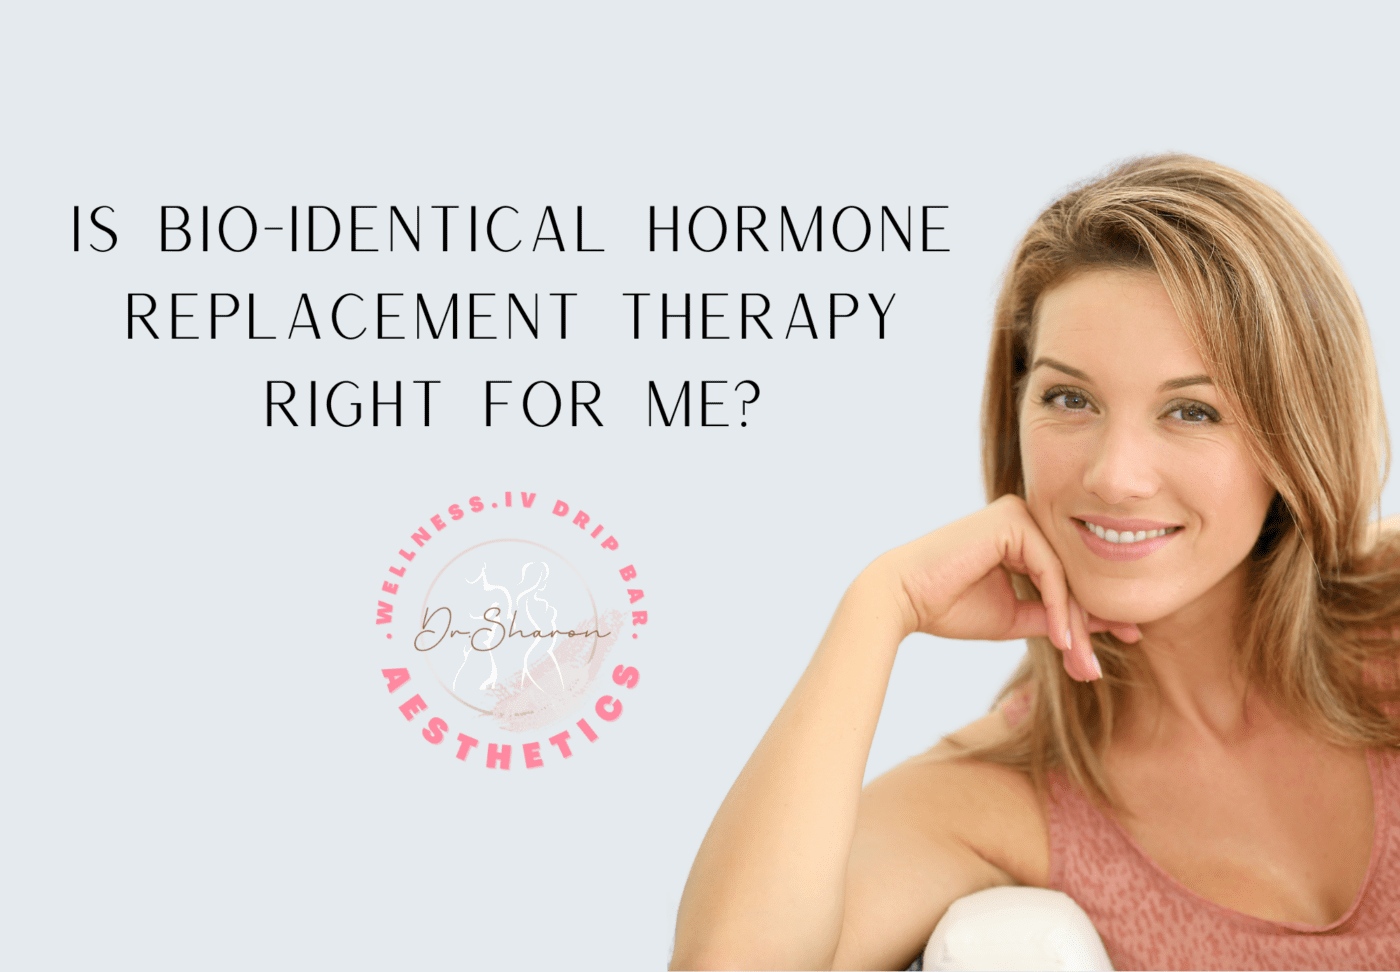 Is bio-identical hormone replacement therapy right for me?